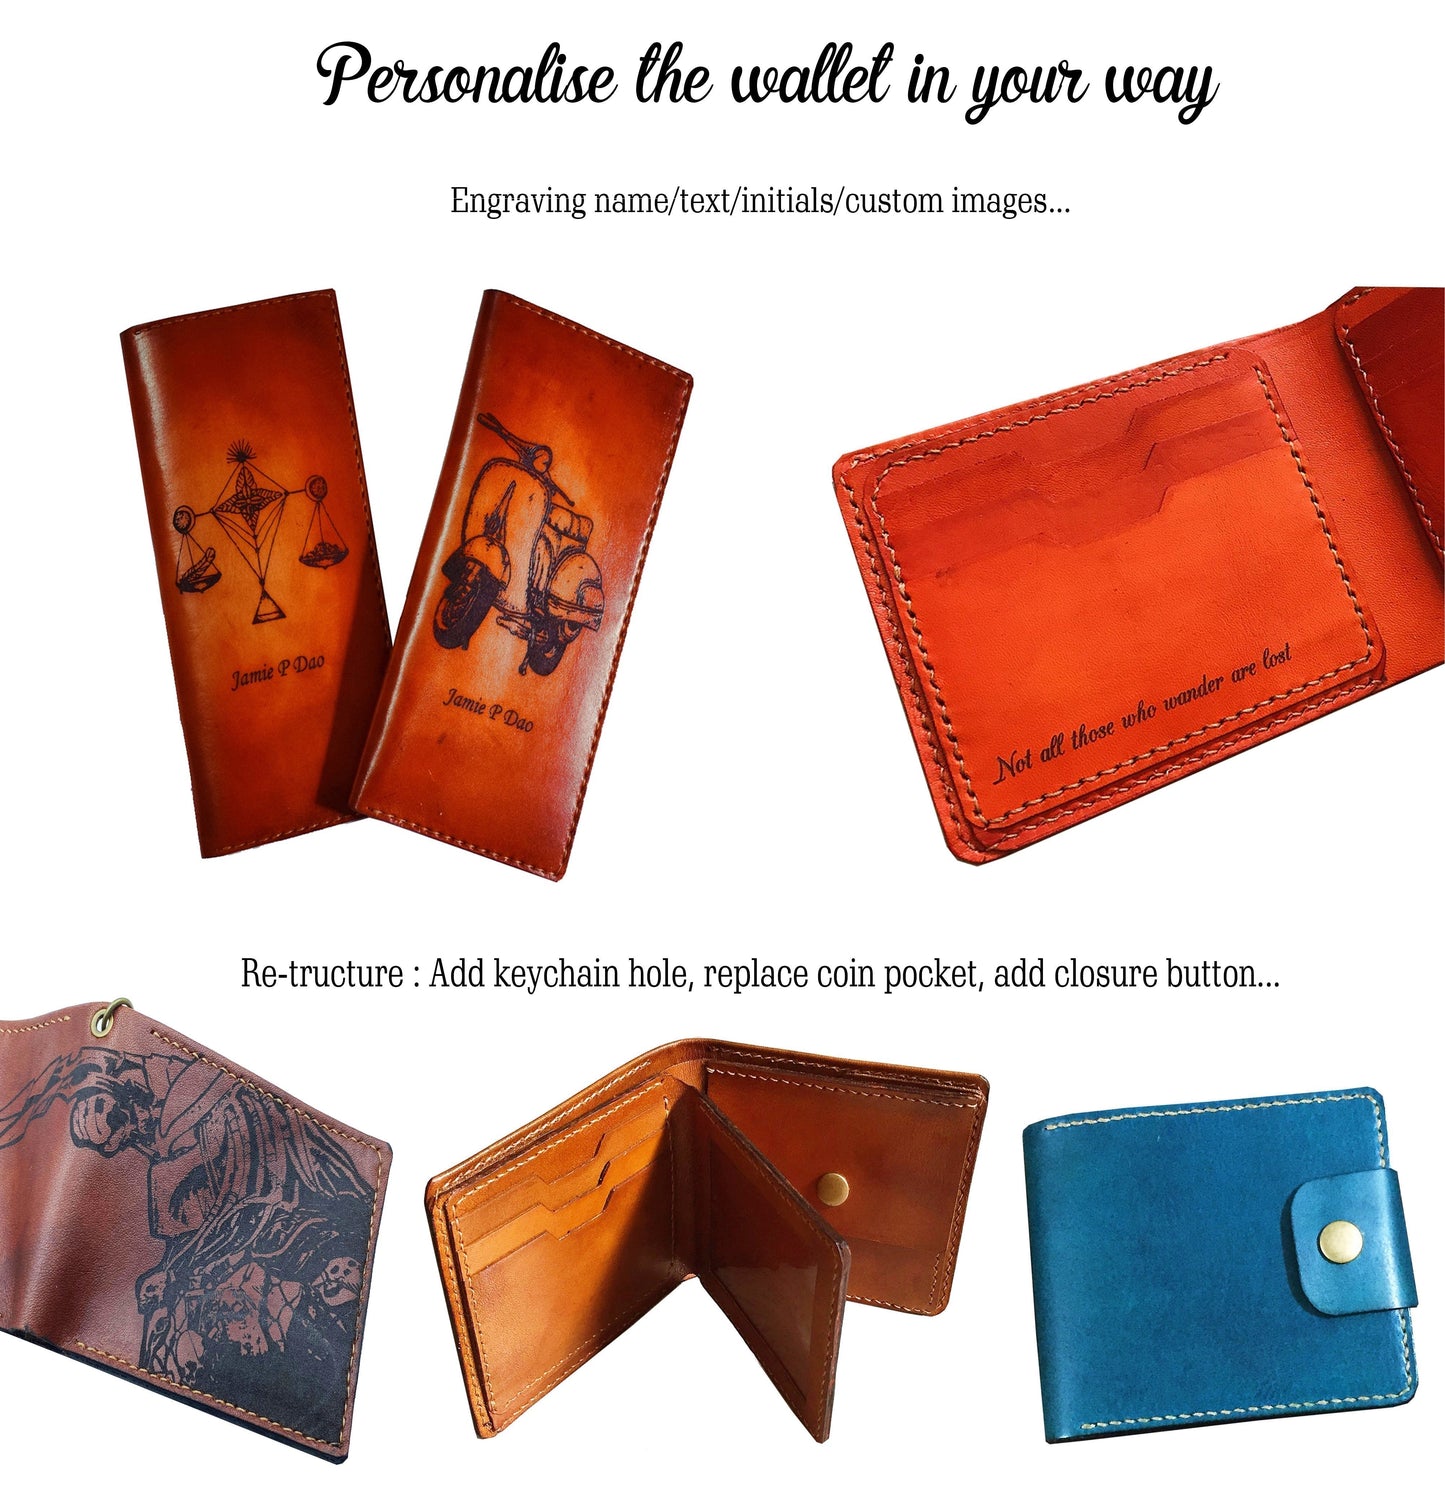 Mayan Corner - Vintage object genuine leather wallet, customized leather gift, cool engrave wallet, leather gift for dad, husband, time wallet retro style